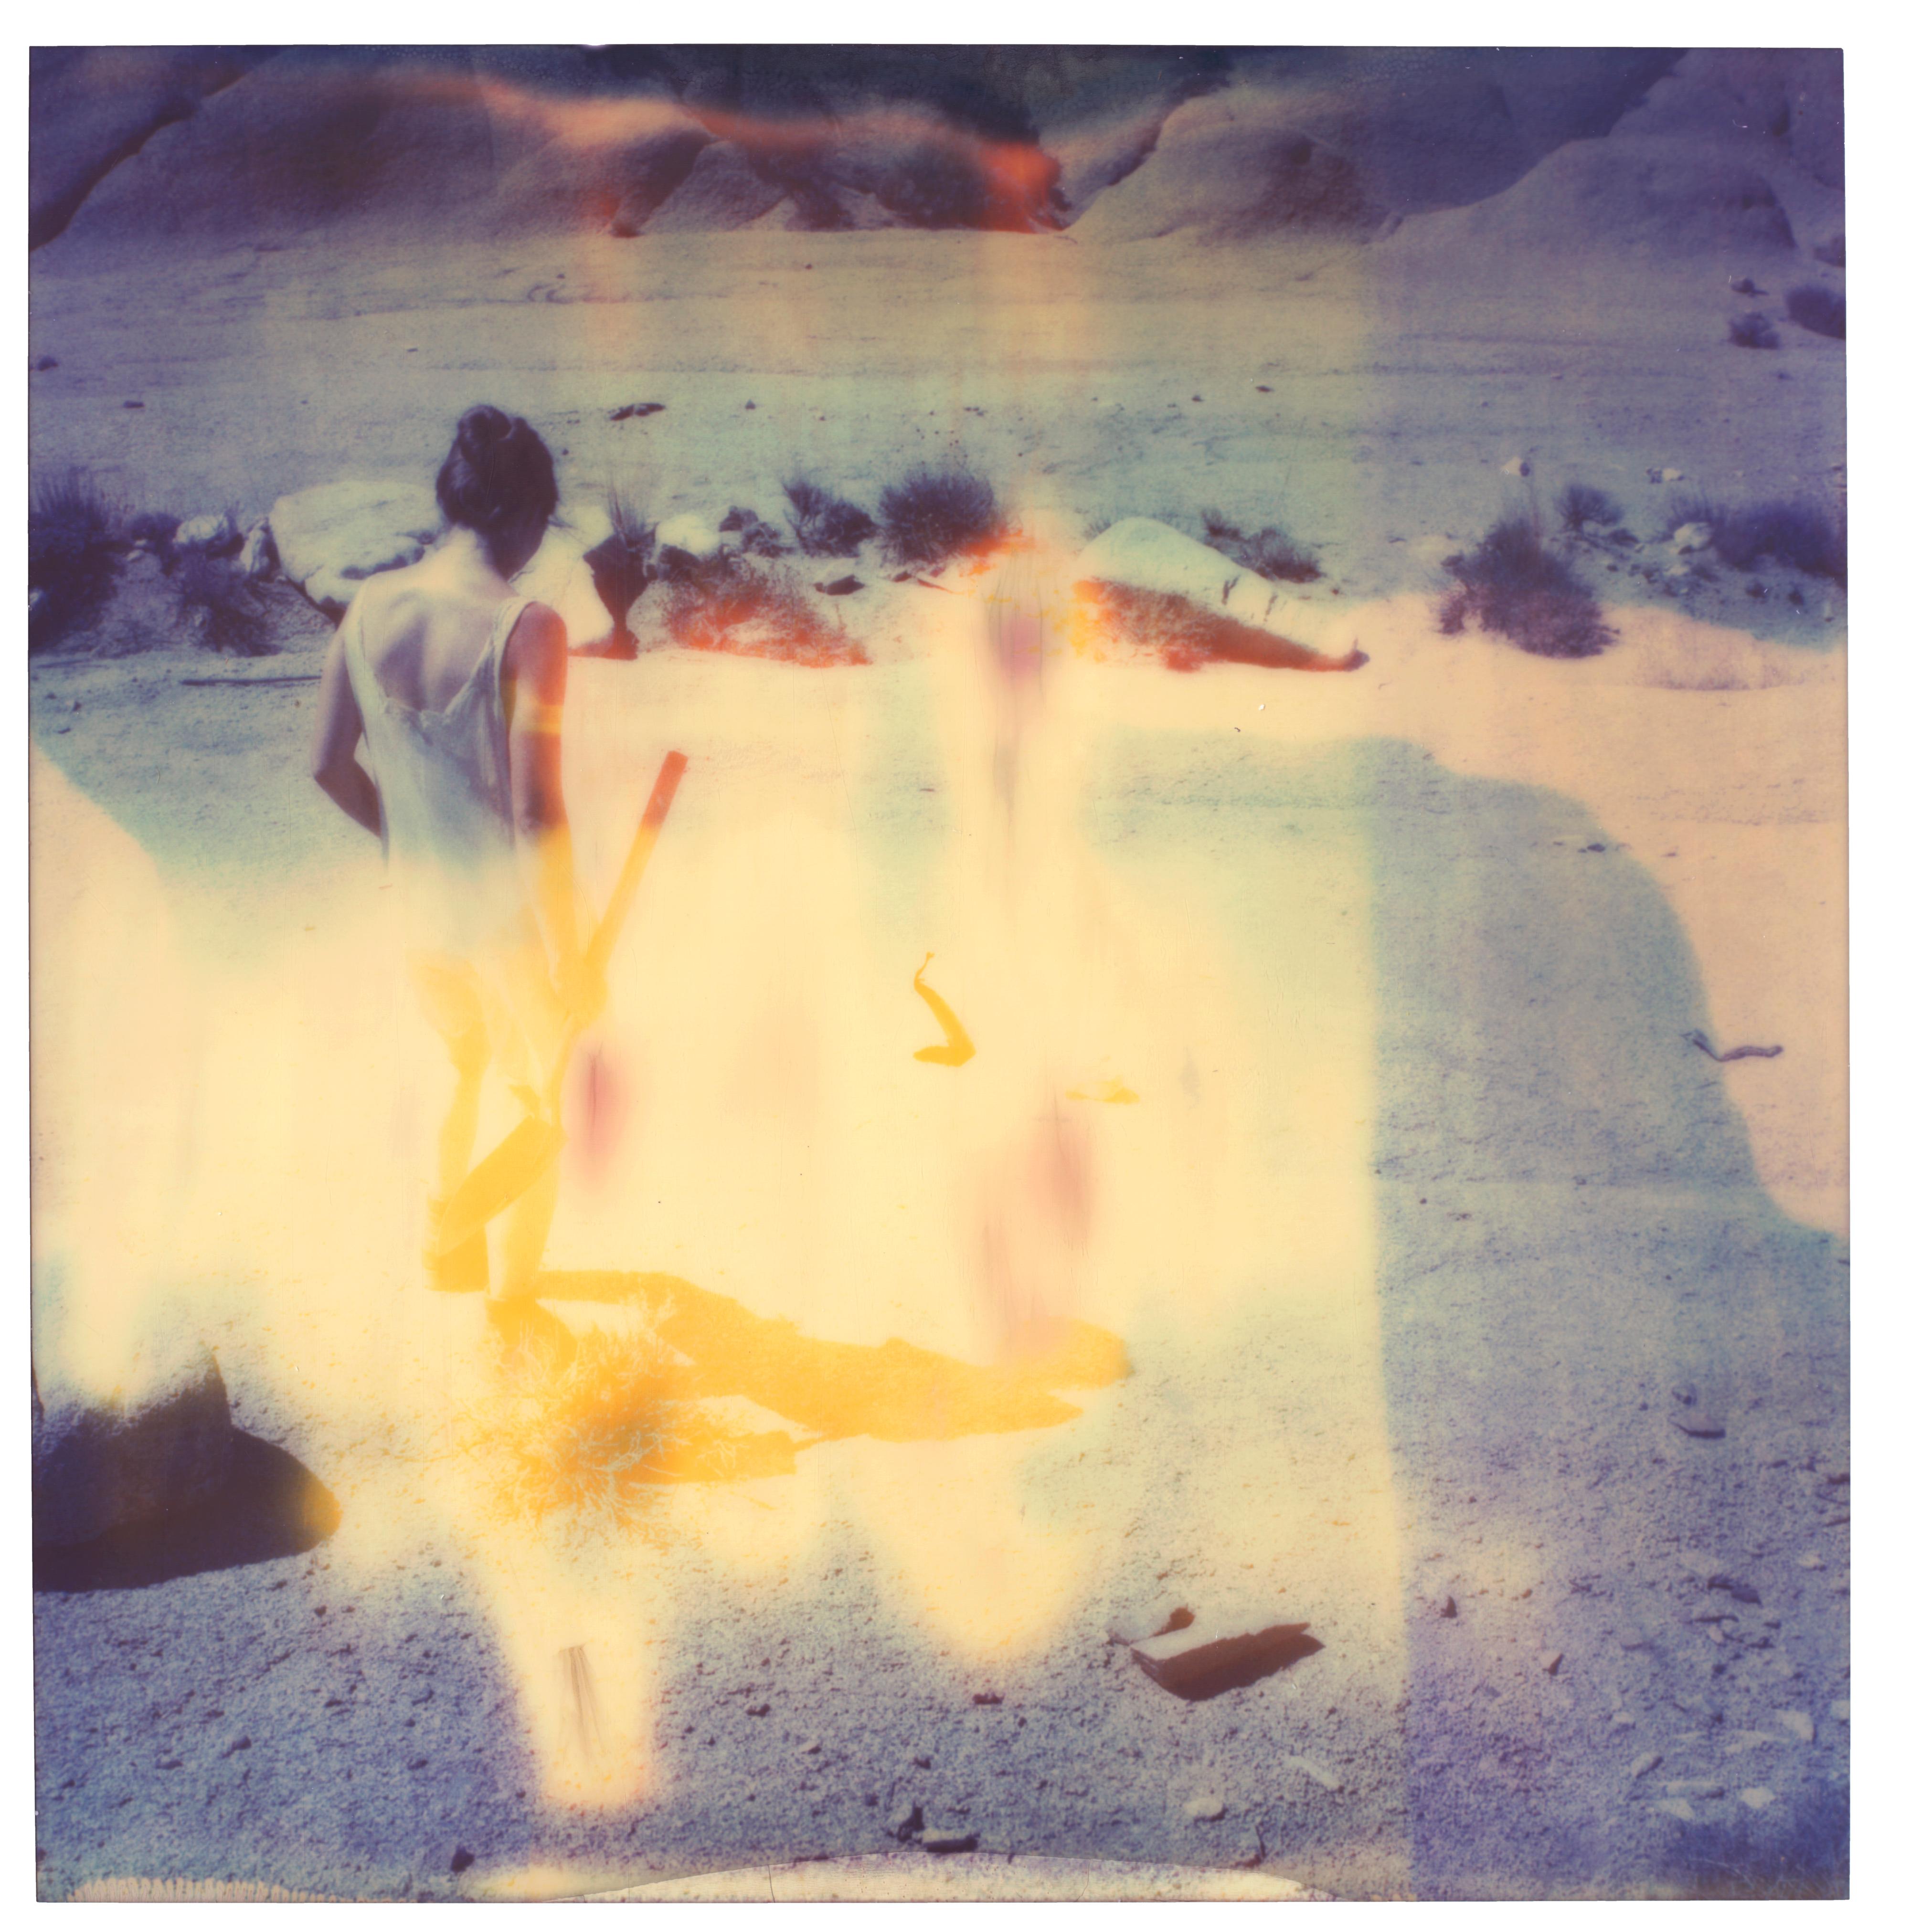 Buried - 8 pieces - Contemporary, Figurative, expired, Polaroid, analog For Sale 1